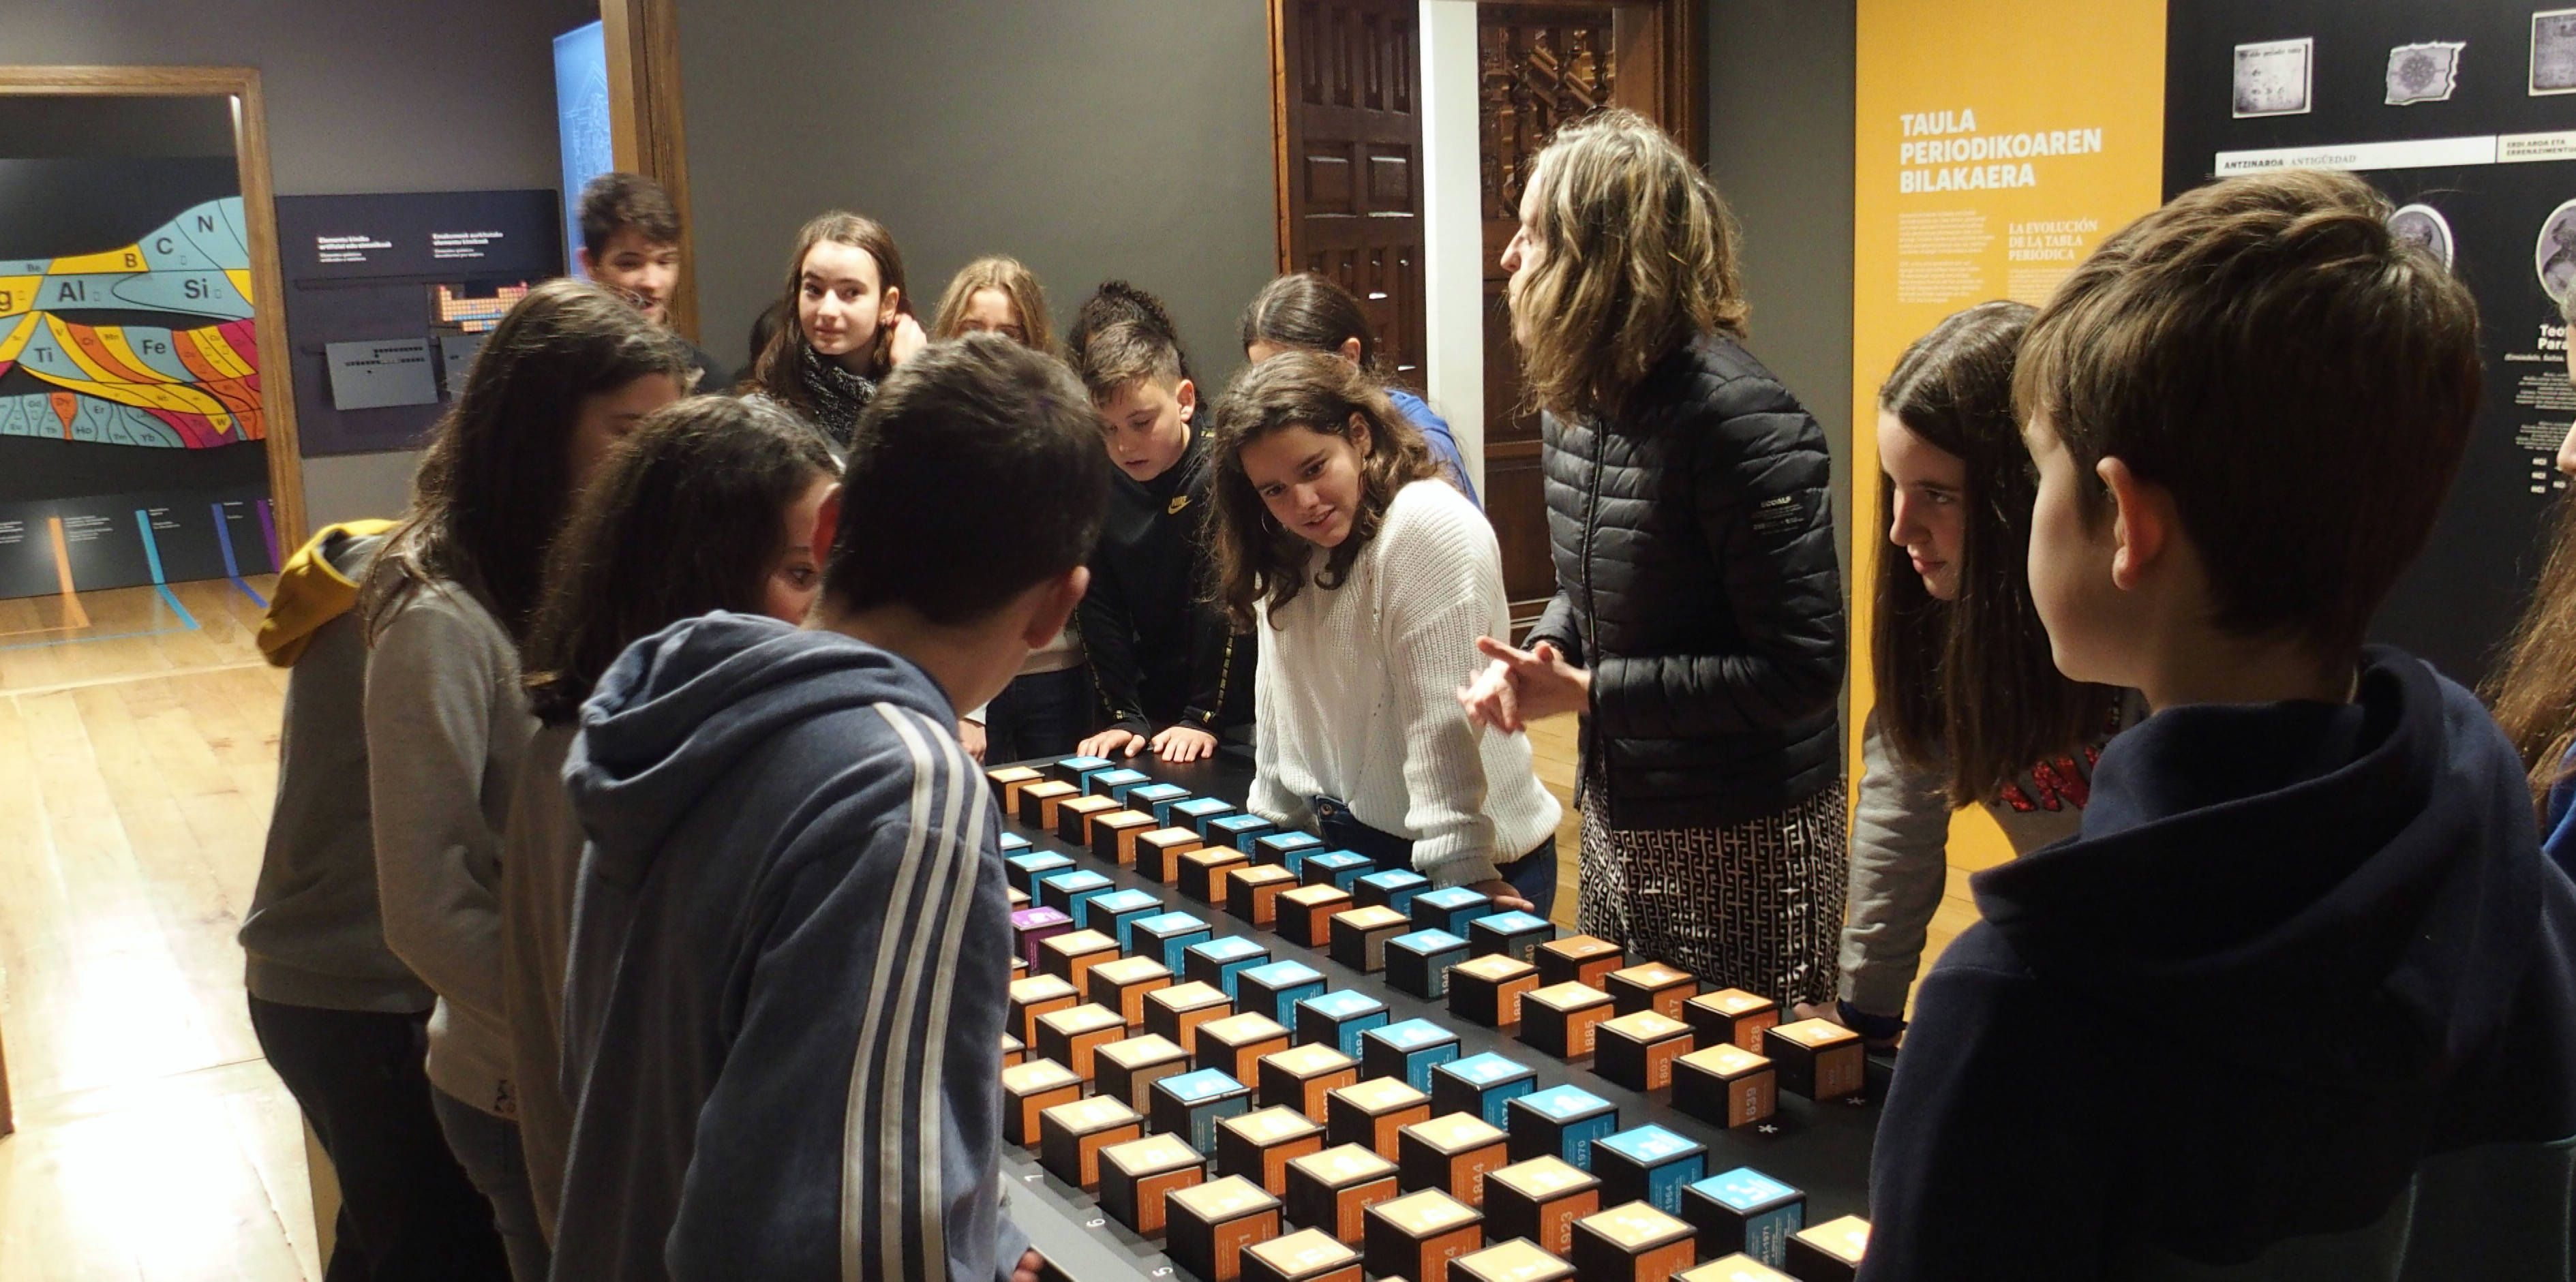 Students visiting the temporary exhibition on the periodic table.